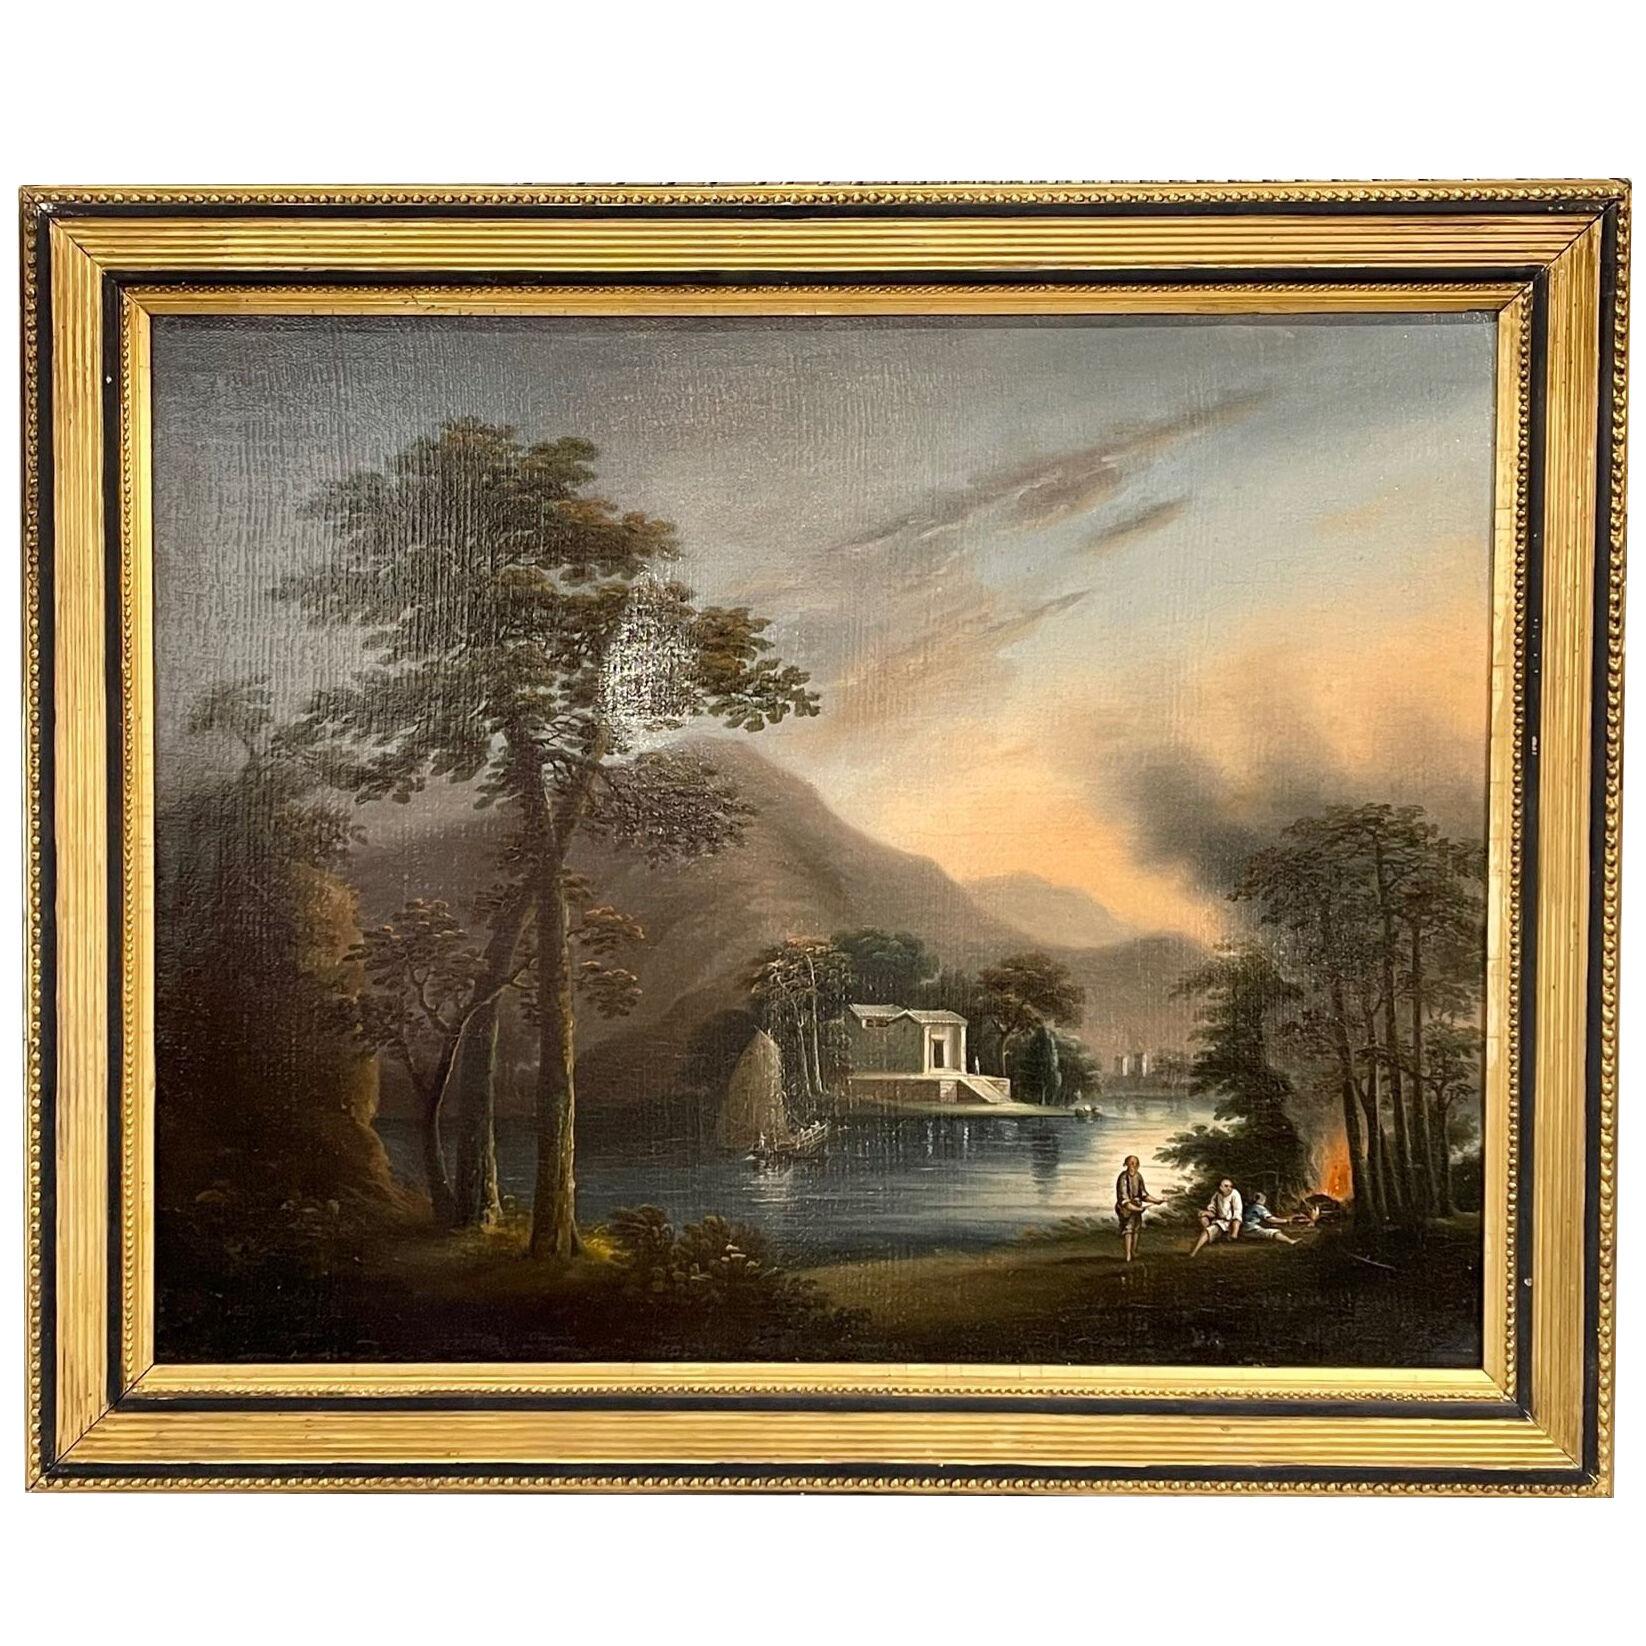 19th Century English Oil Painting in a Giltwood and Ebony Frame